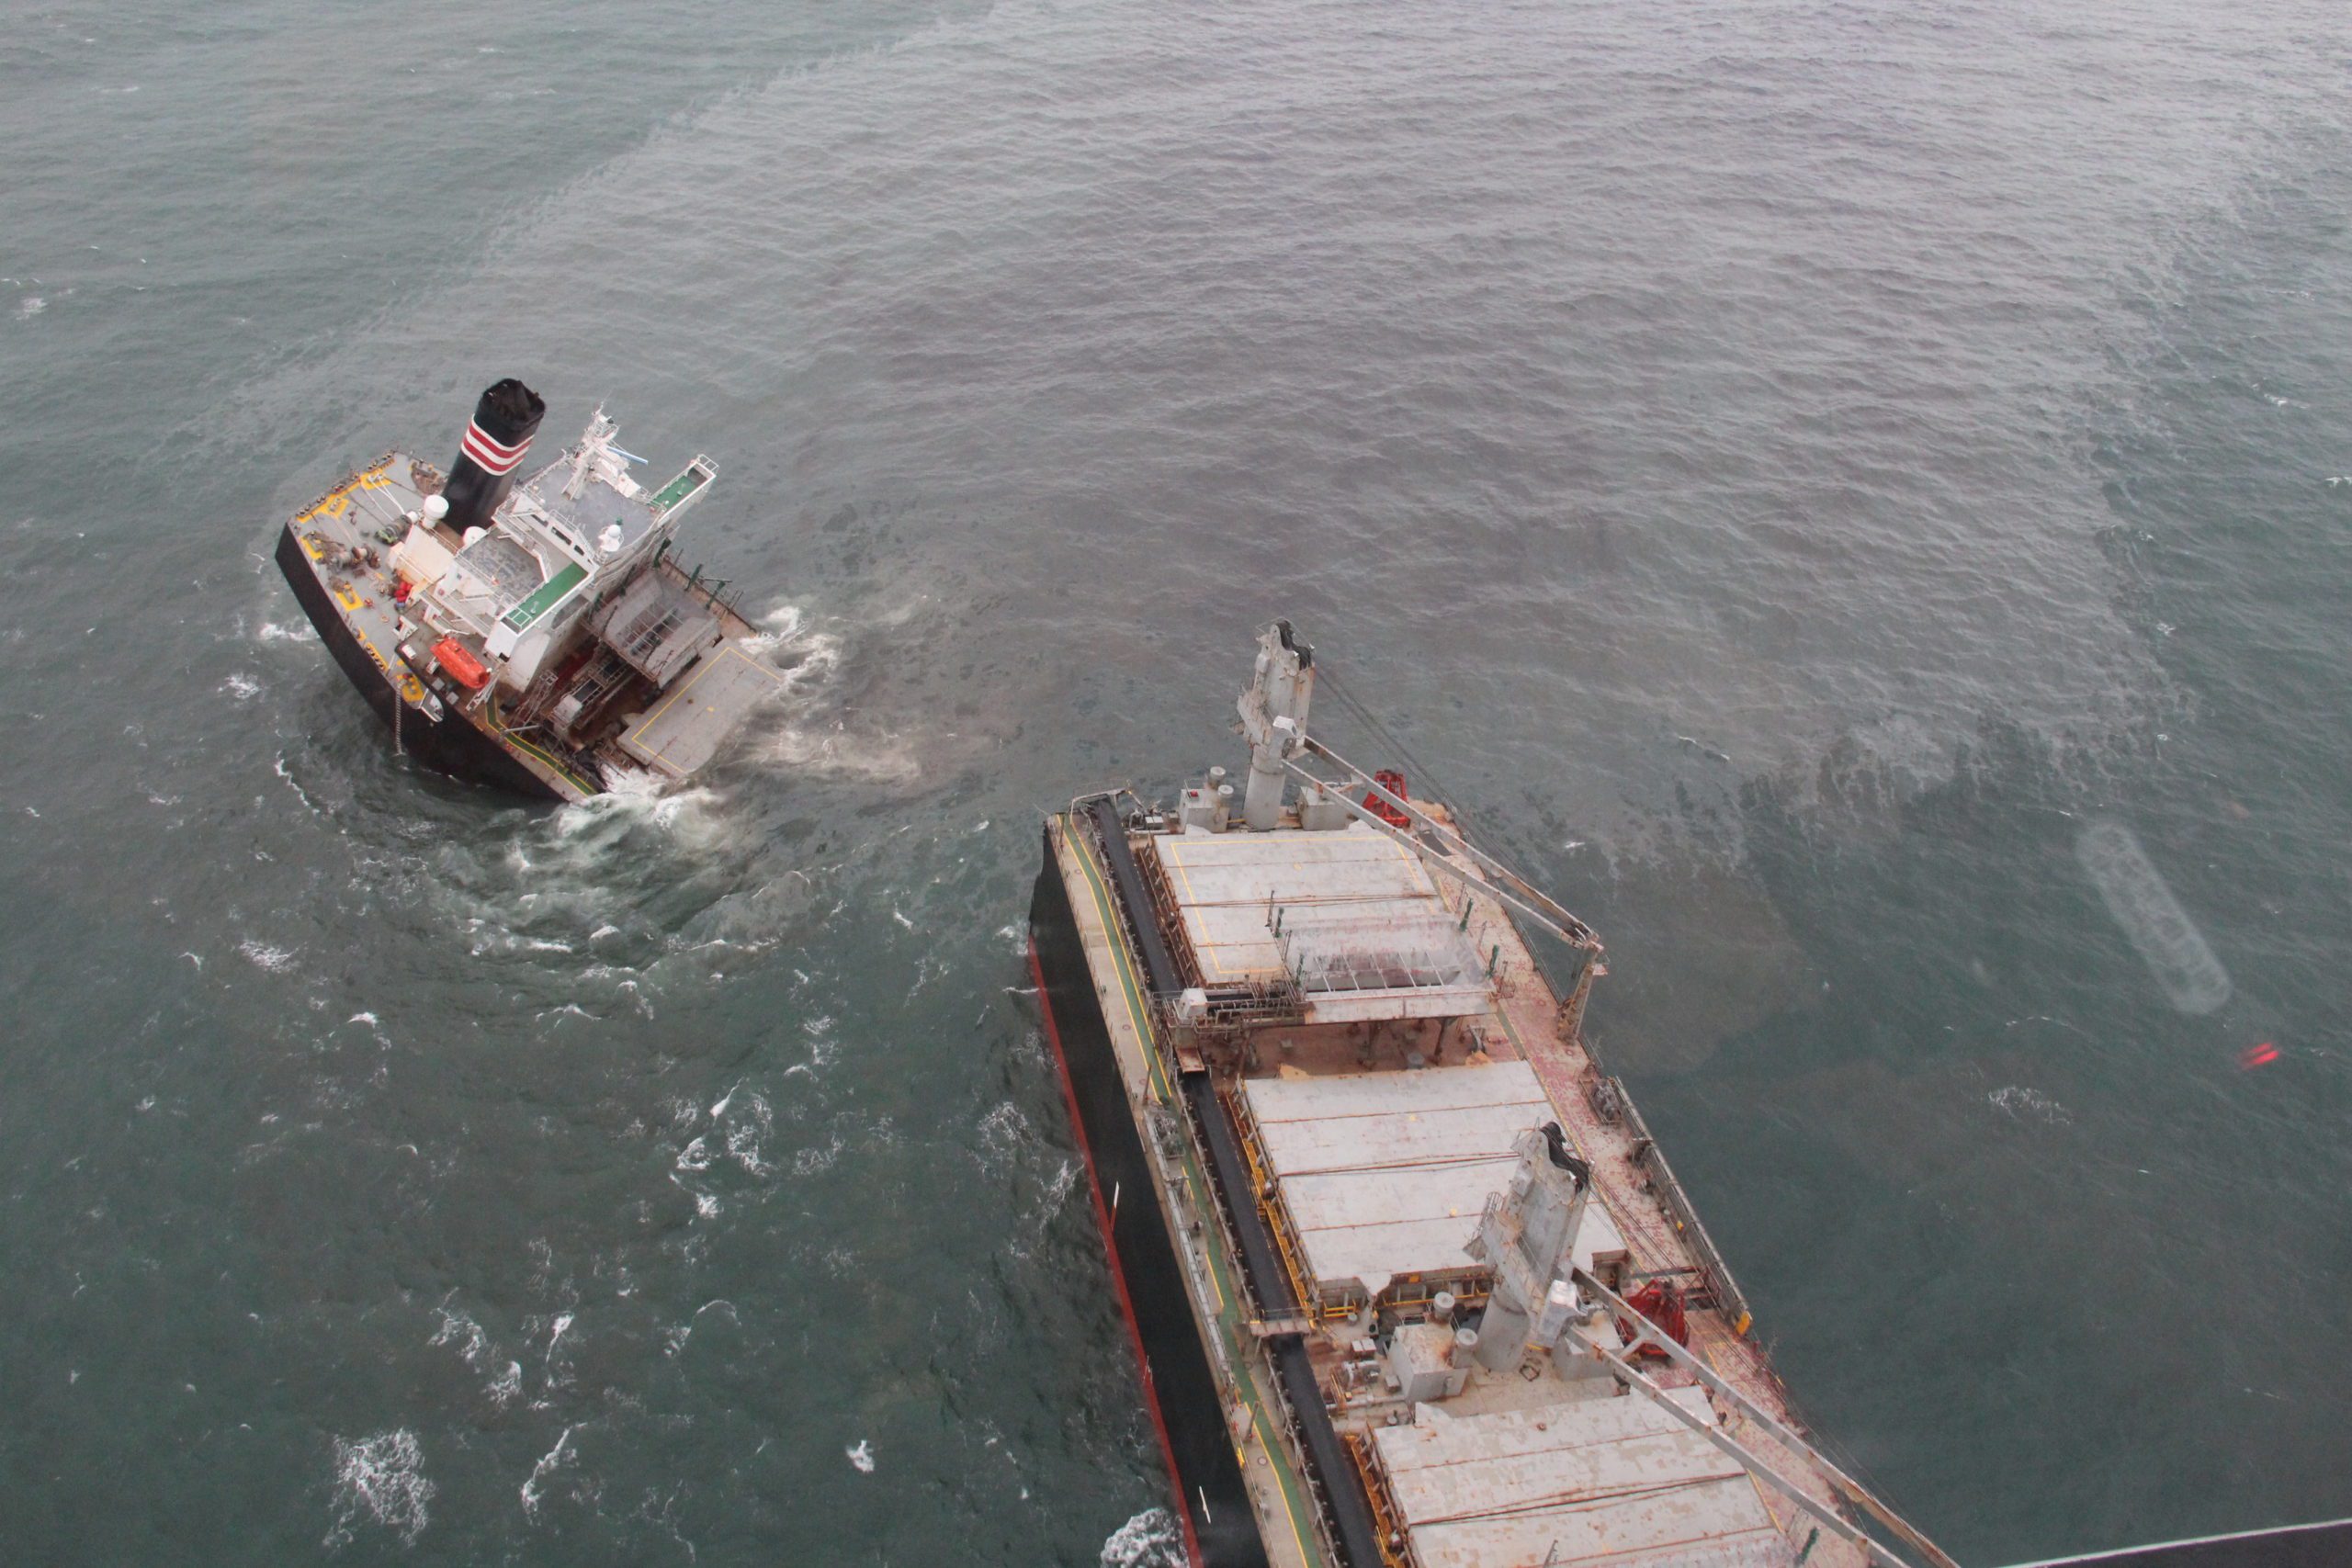 Oil Spills from Wrecked Wood Chip Carrier Crimson Polaris in Japan -Photos